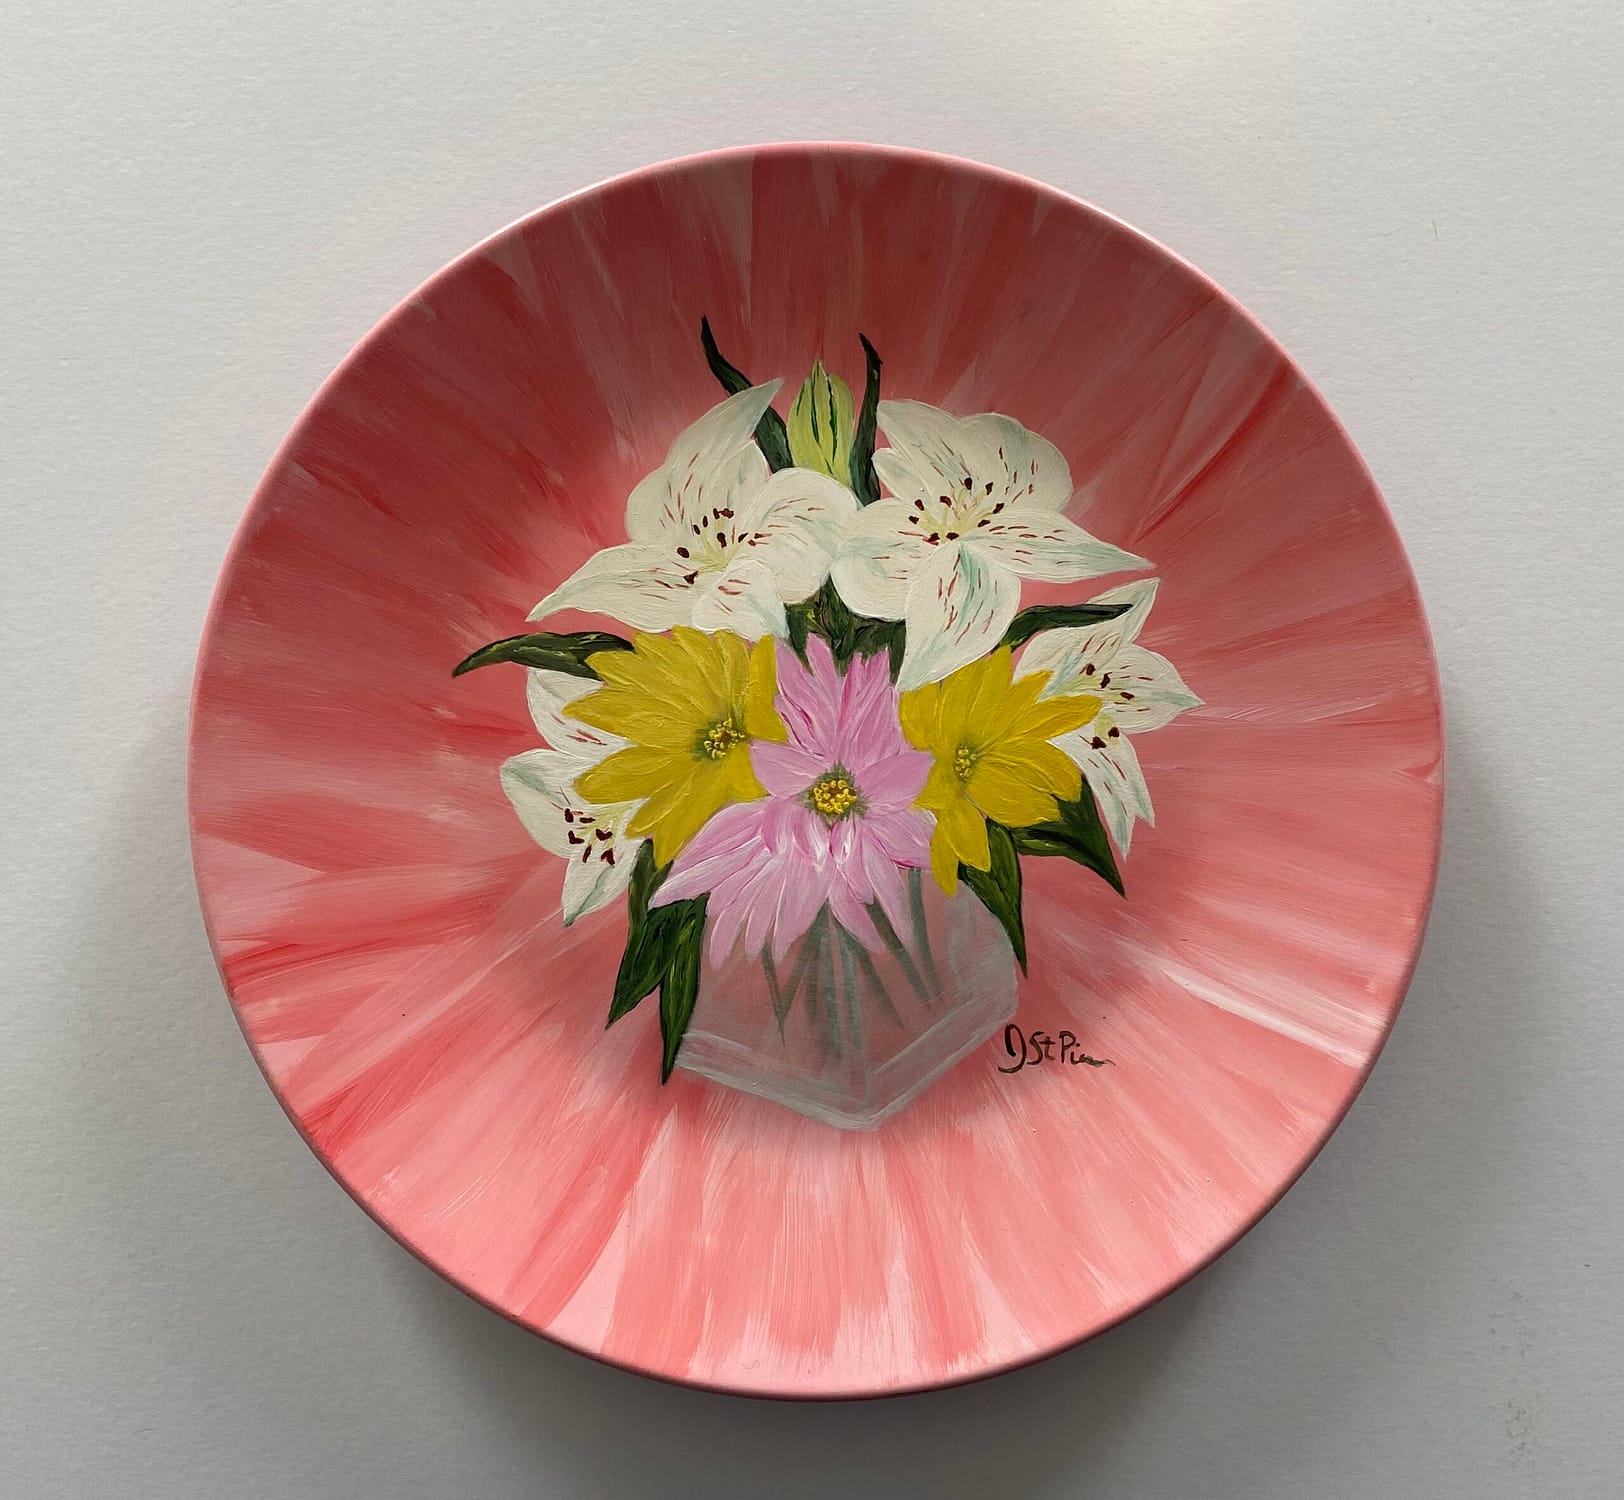 Photo of a pink hand painted plate with white lilies and pink and yellow daisies in a glass vase